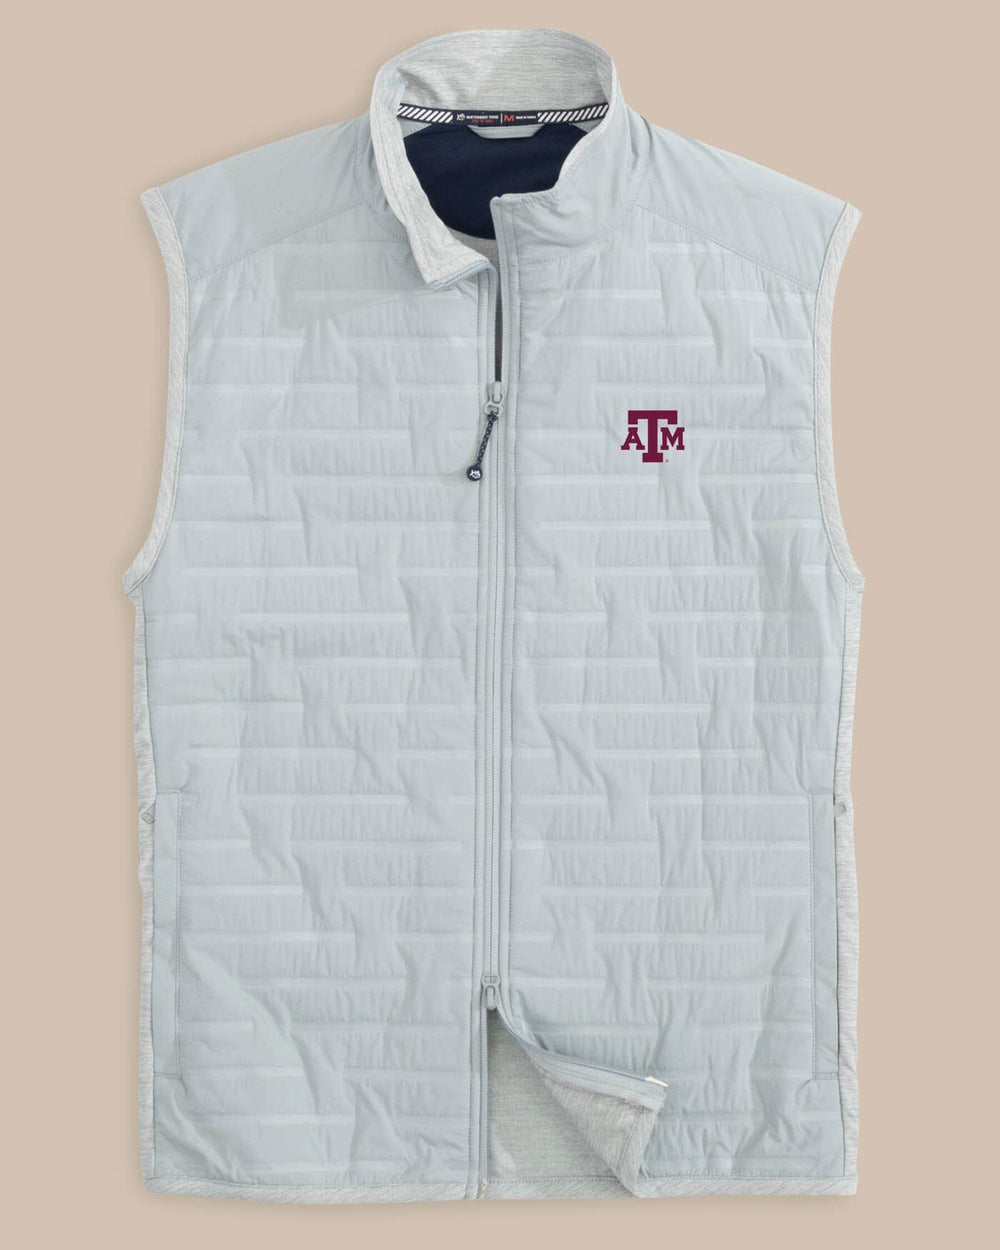 The front view of the Texas A&M Aggies Abercorn Vest by Southern Tide - Gravel Grey